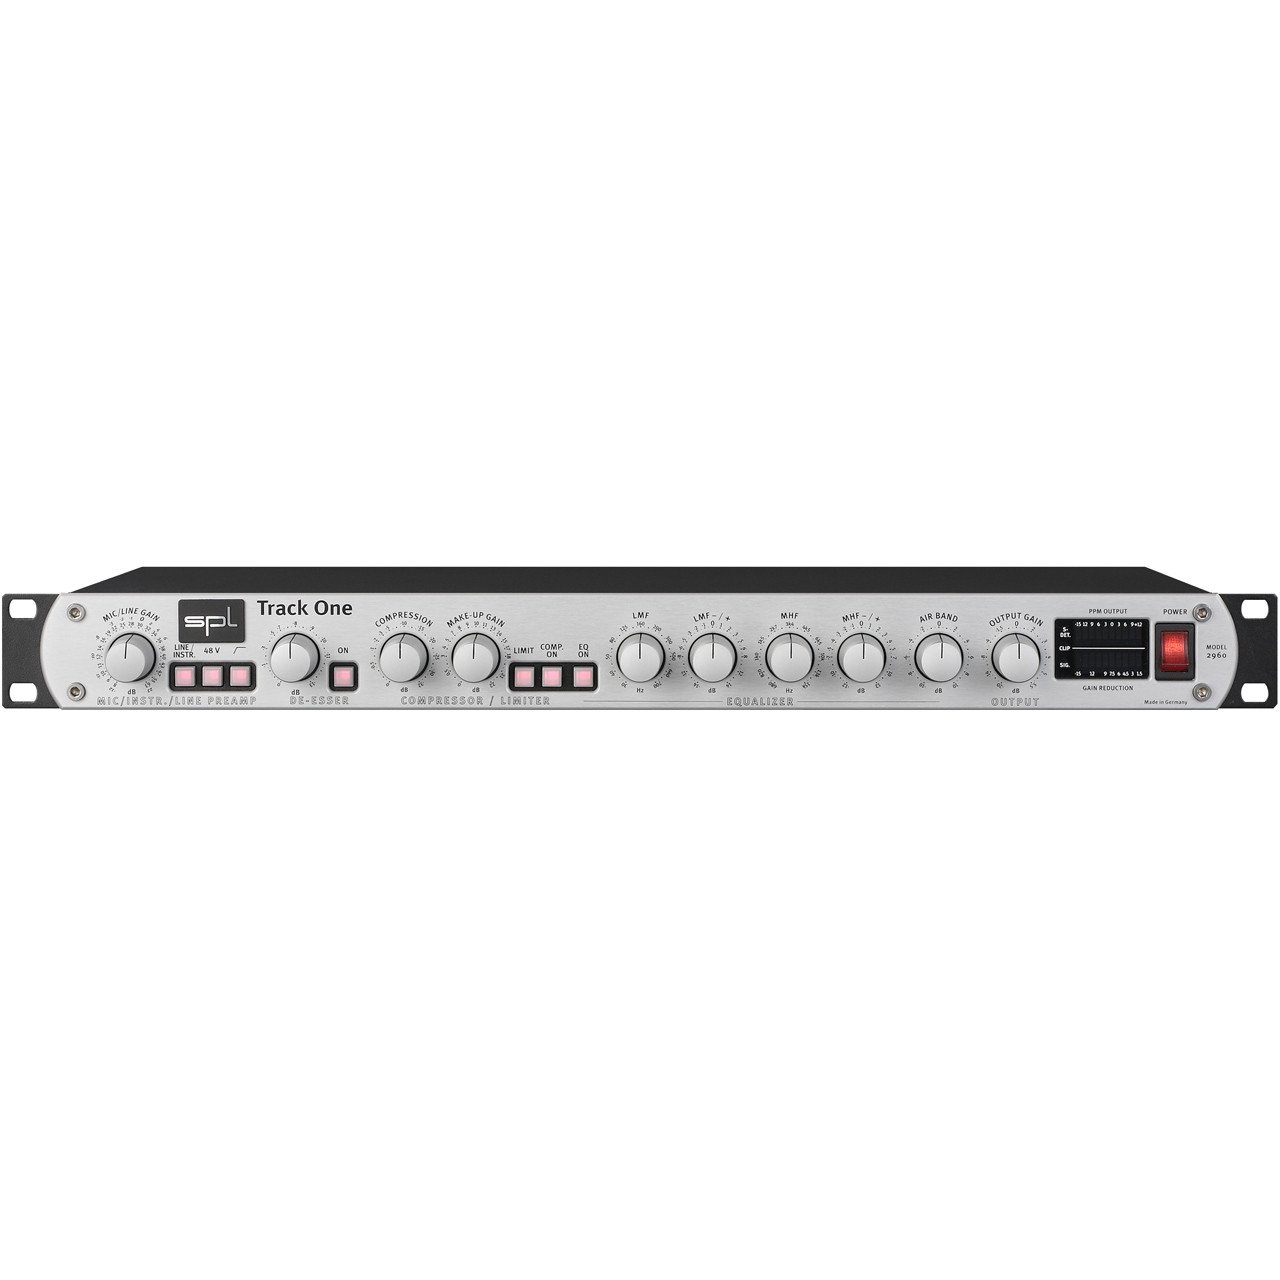 Preamps/Channel Strips - SPL Track One Recording Channel